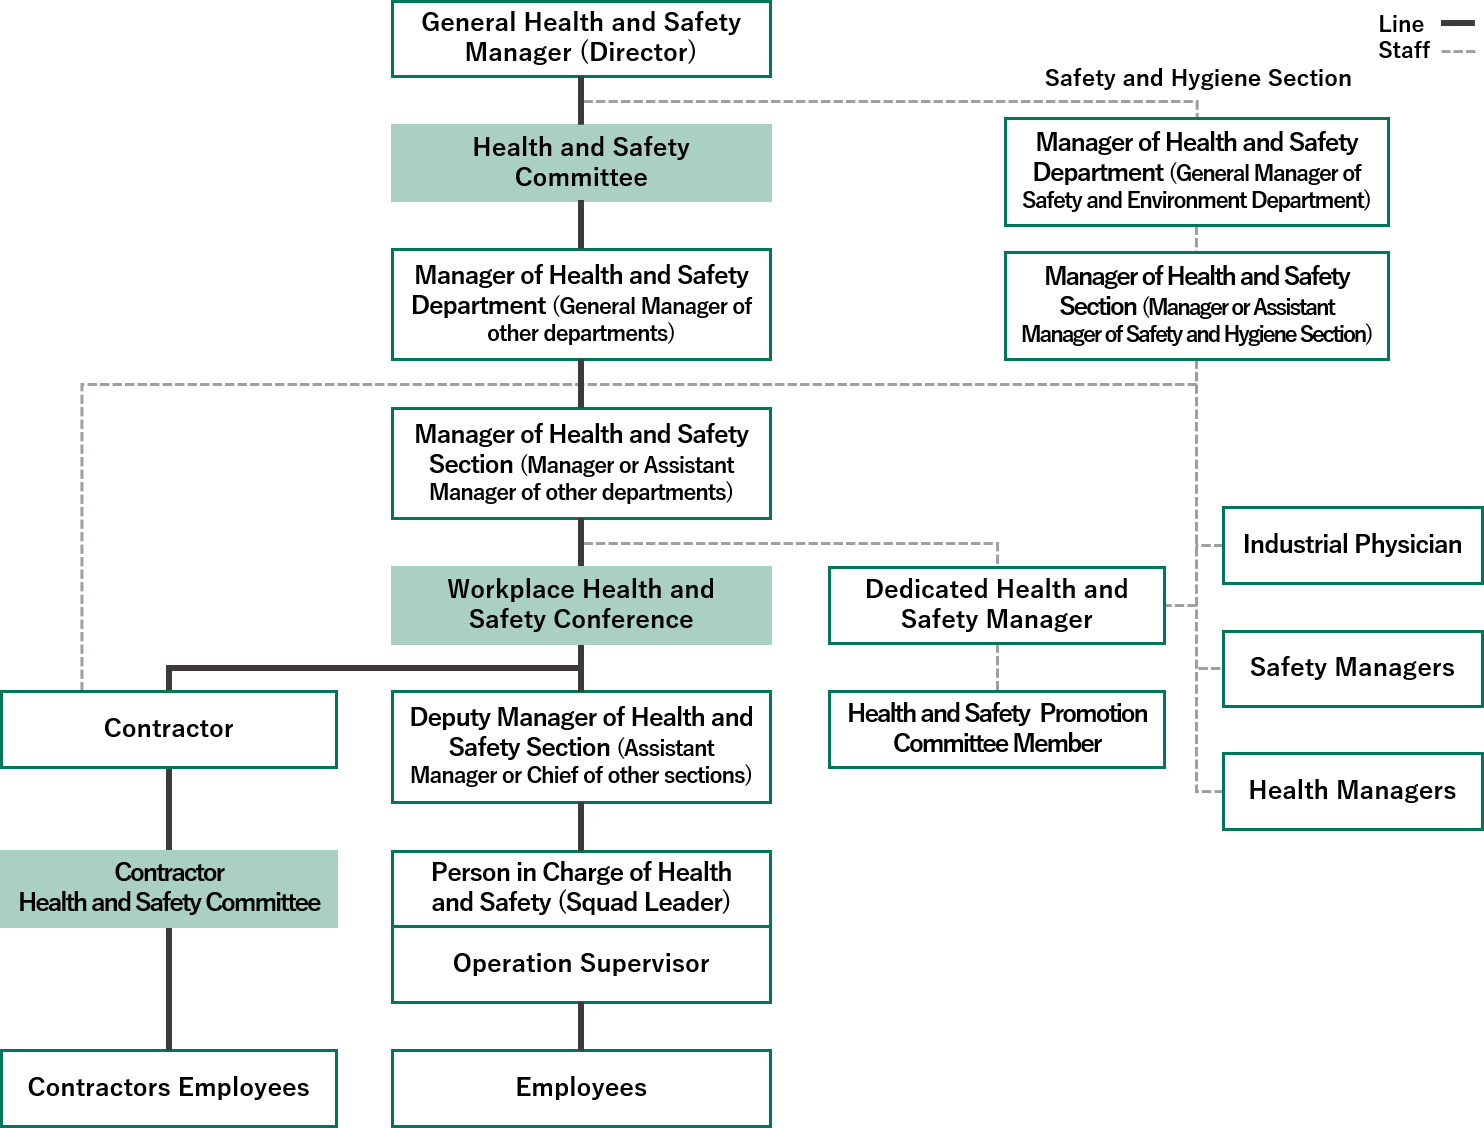 Health and Safety Management Organization Chart